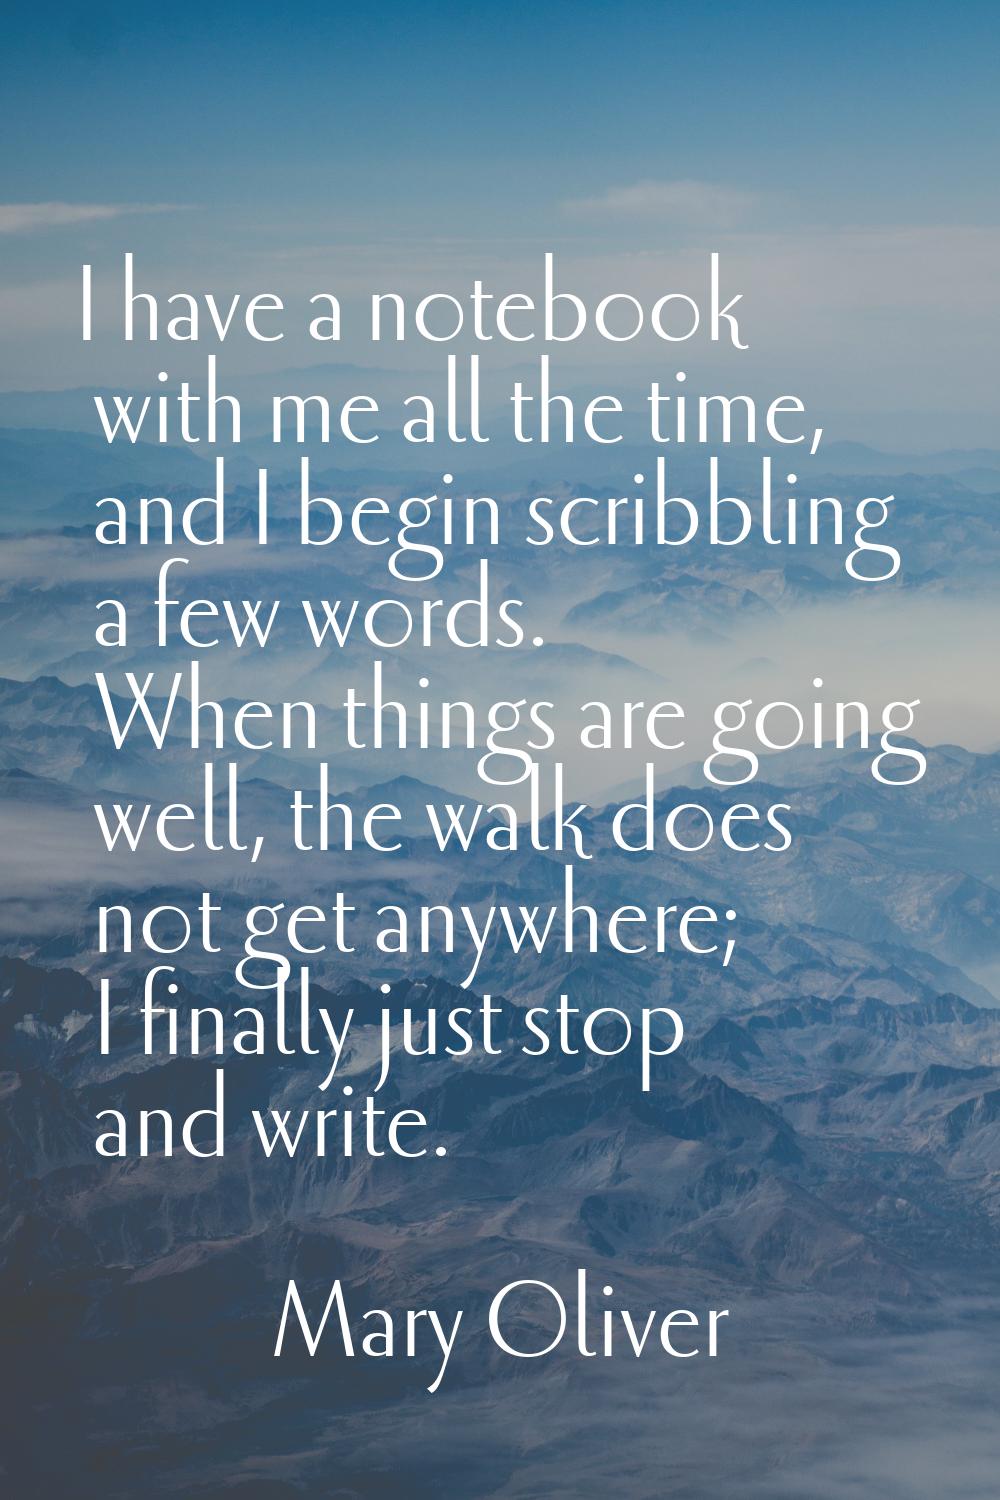 I have a notebook with me all the time, and I begin scribbling a few words. When things are going w